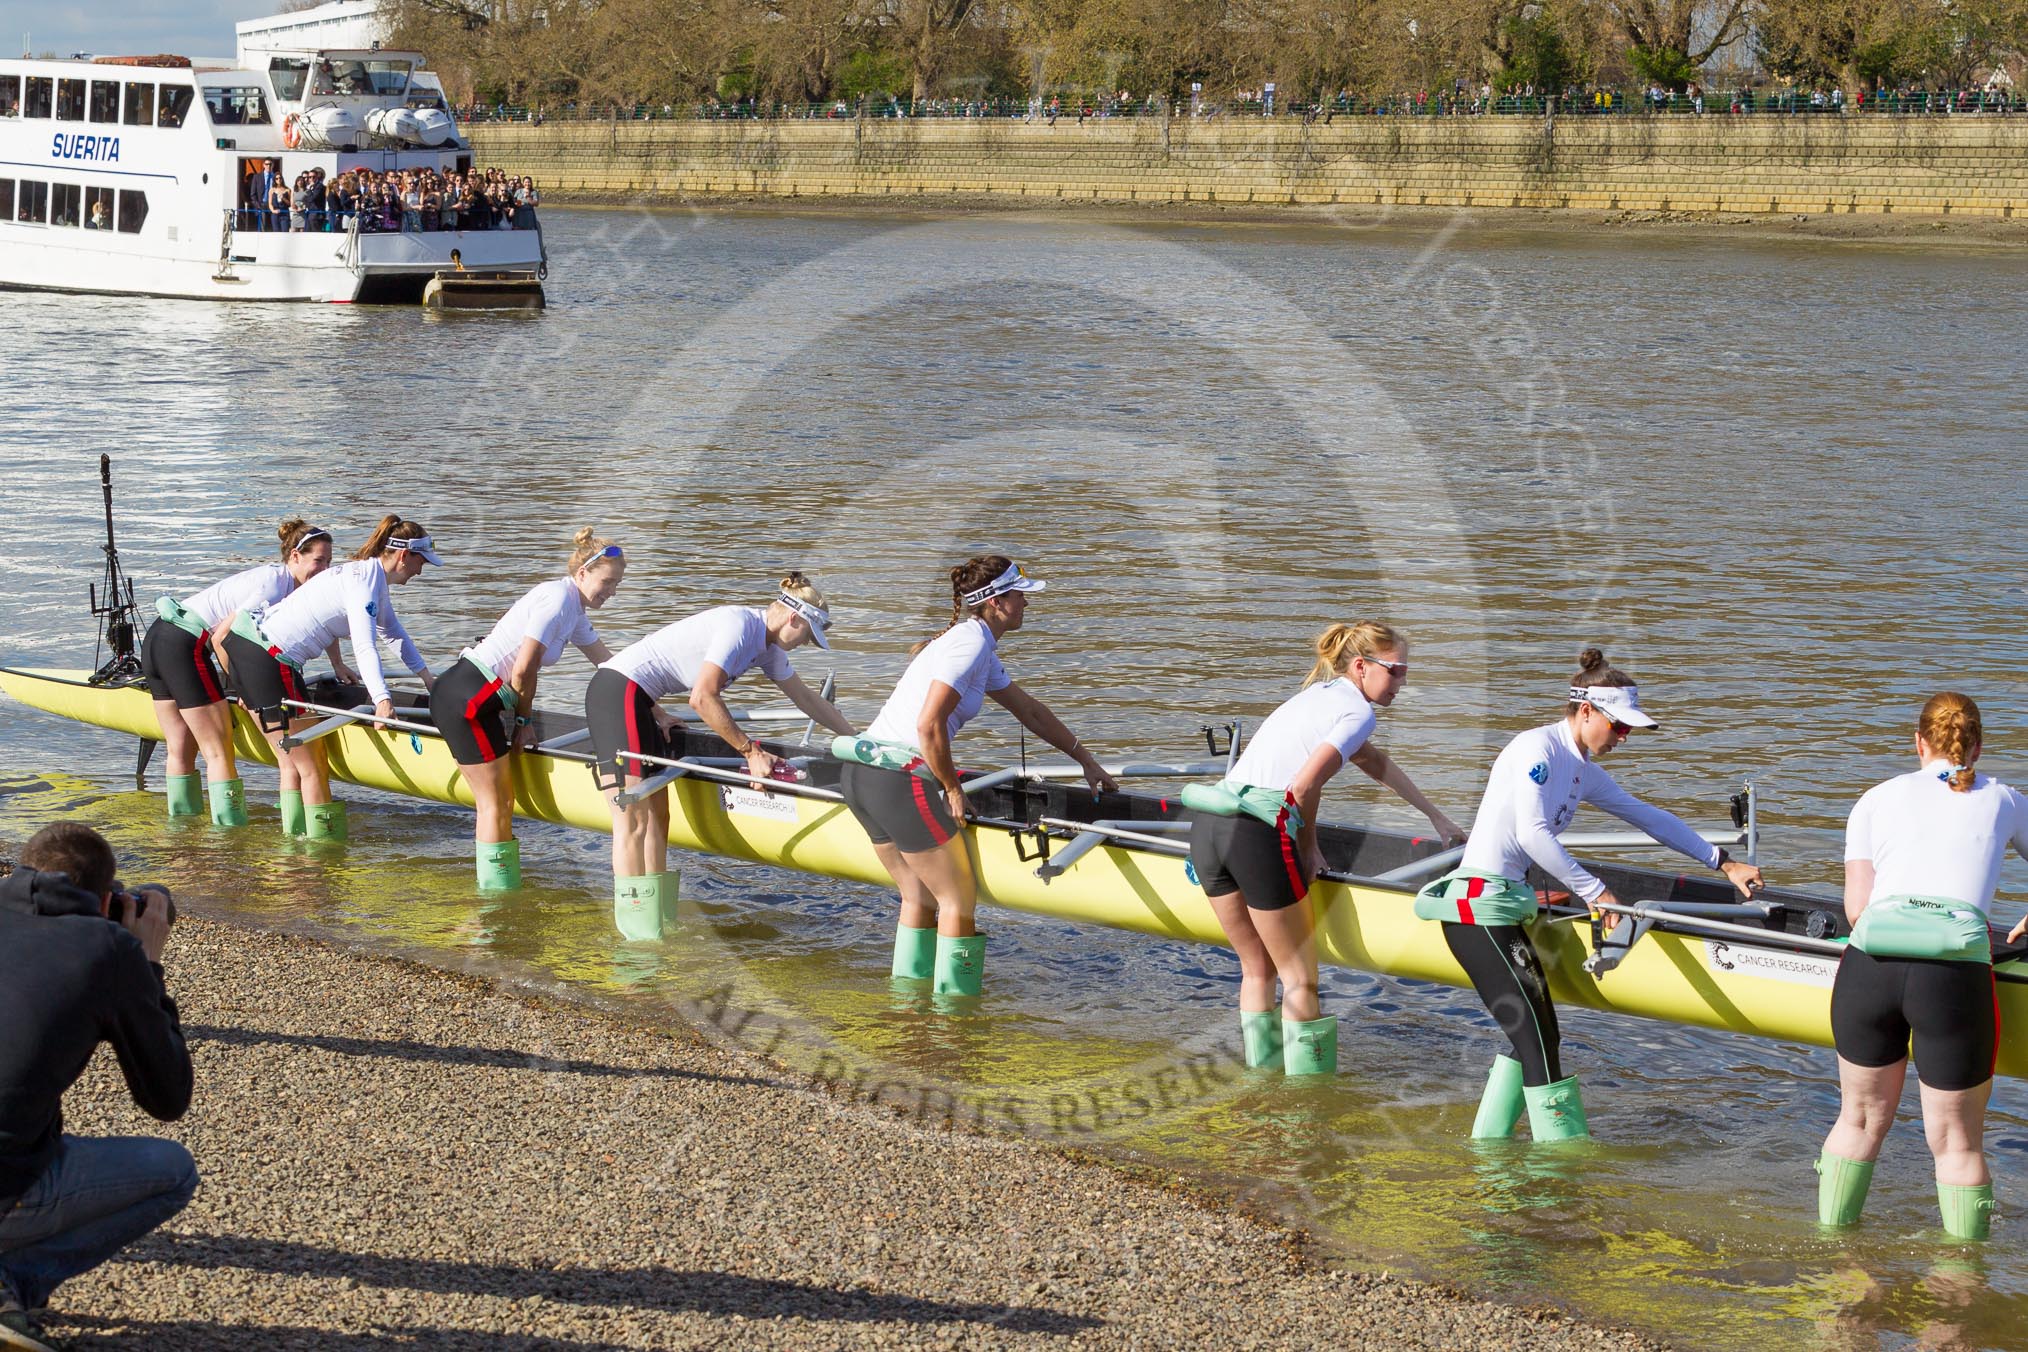 The Boat Race season 2017 -  The Cancer Research Women's Boat Race: The CUWBC crew getting their boat onto the river, here stroke Melissa Wilson, 7 Myriam Goudet, 6 Alice White, 5 Holly Hill, 4 Anna Dawson, 3 Claire Lambe, 2 Imogen Grant, bow Ashton Brown.
River Thames between Putney Bridge and Mortlake,
London SW15,

United Kingdom,
on 02 April 2017 at 15:47, image #61